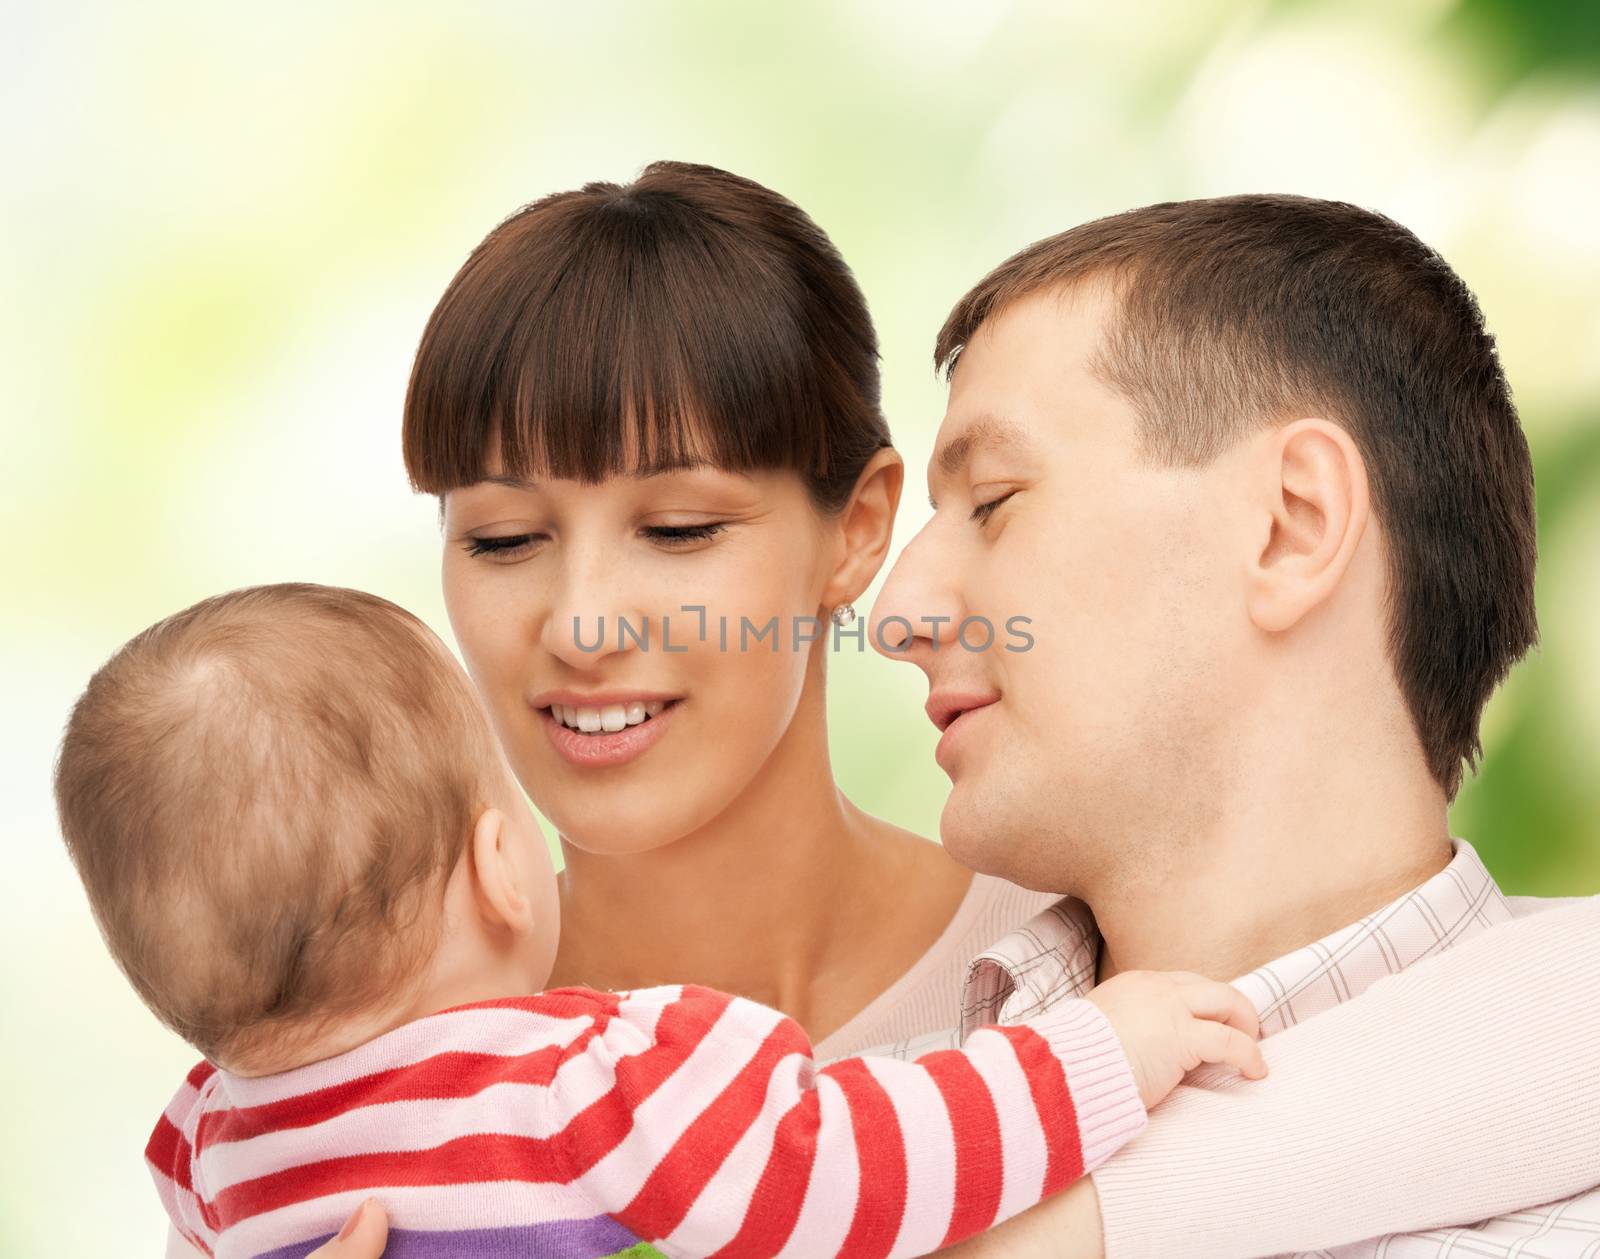 picture of happy mother and father with adorable baby (focus on man)